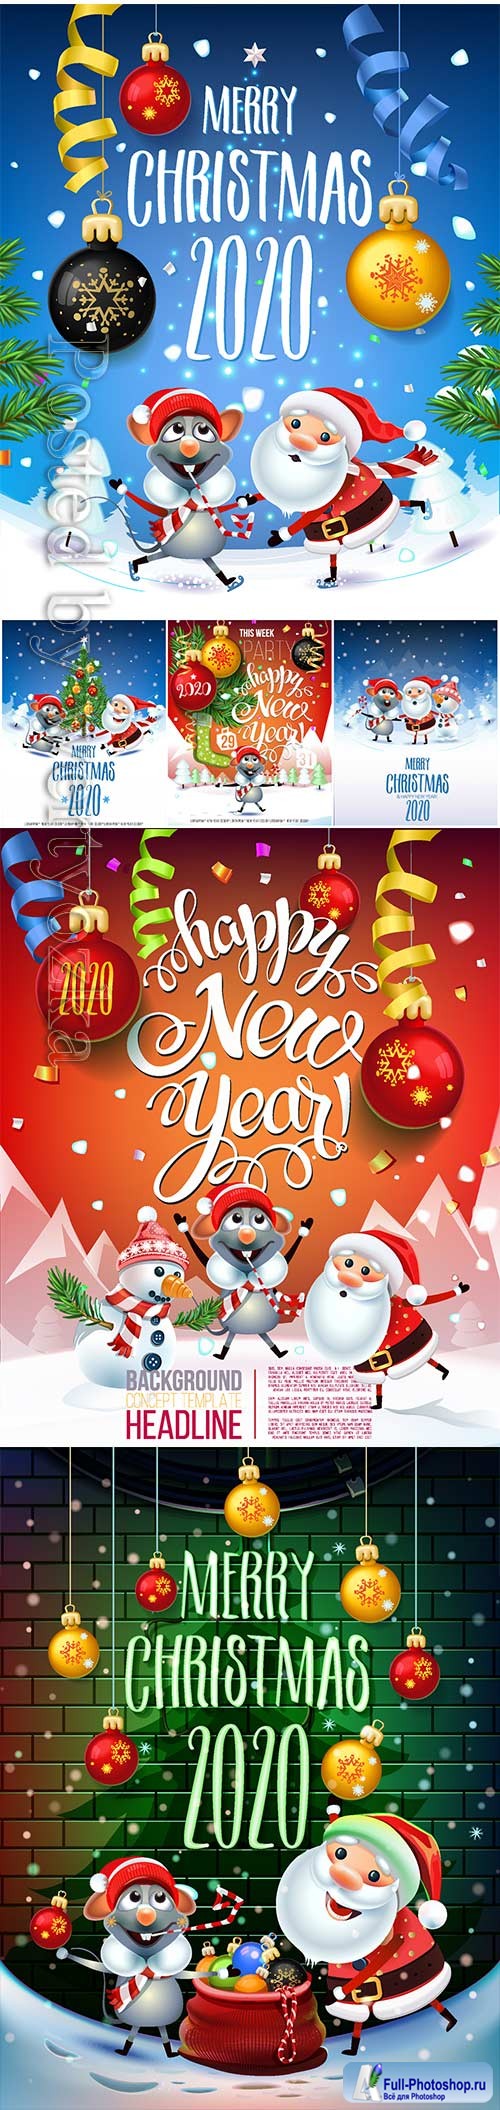 2020 Merry Chistmas and Happy New Year vector illustration # 8